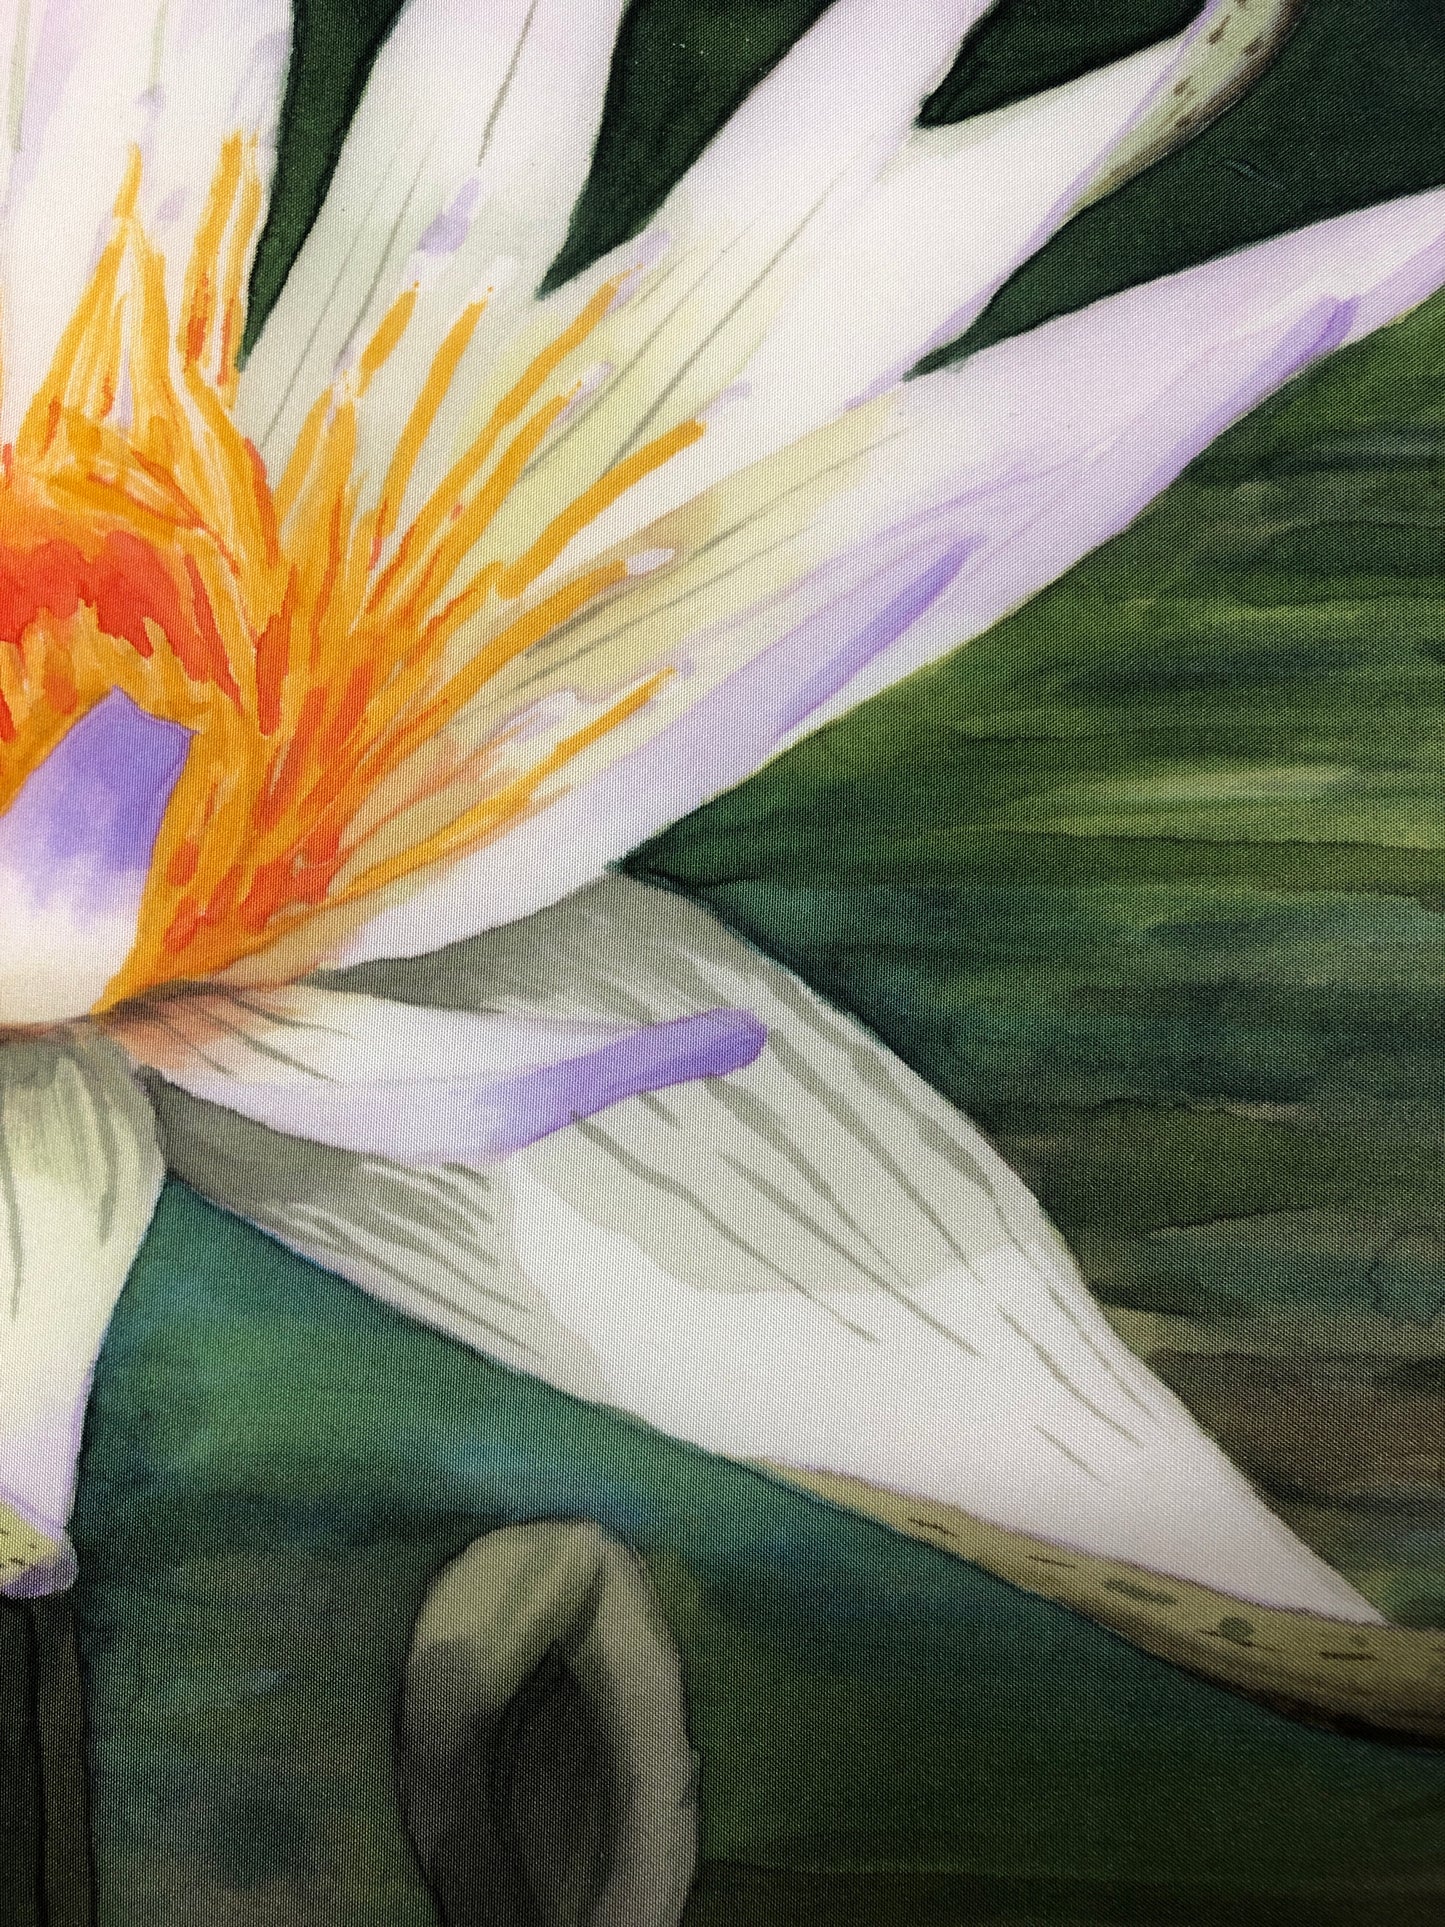 “Water Lily” - Painting on Silk - SOLD